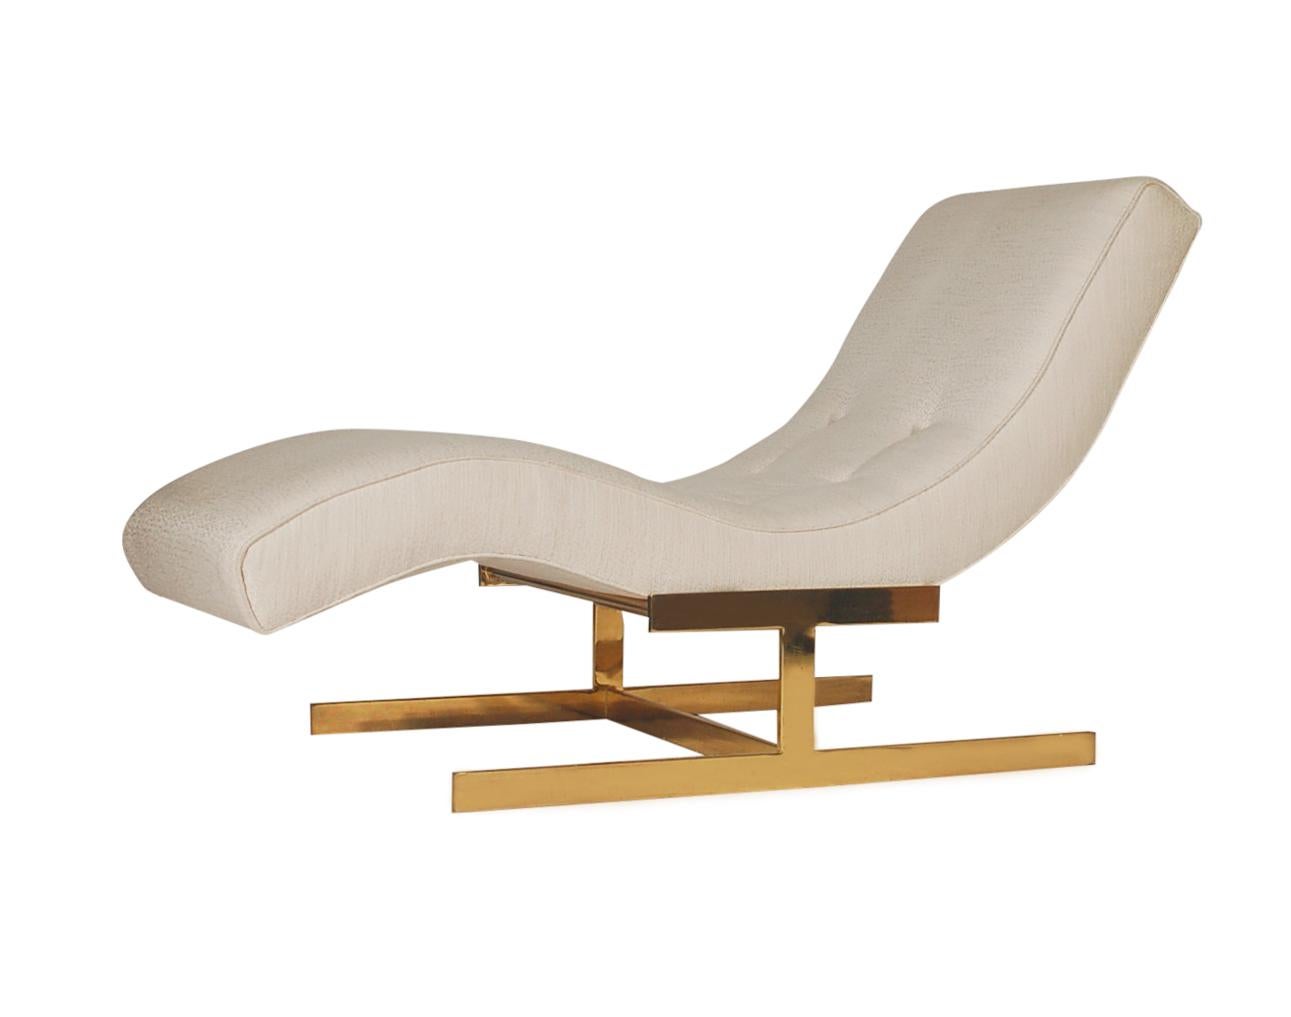 A sleek and glamorous design by Milo Baughman for Thayer Coggin. This chaise lounge features its original white upholstery with a brass flat bar base.